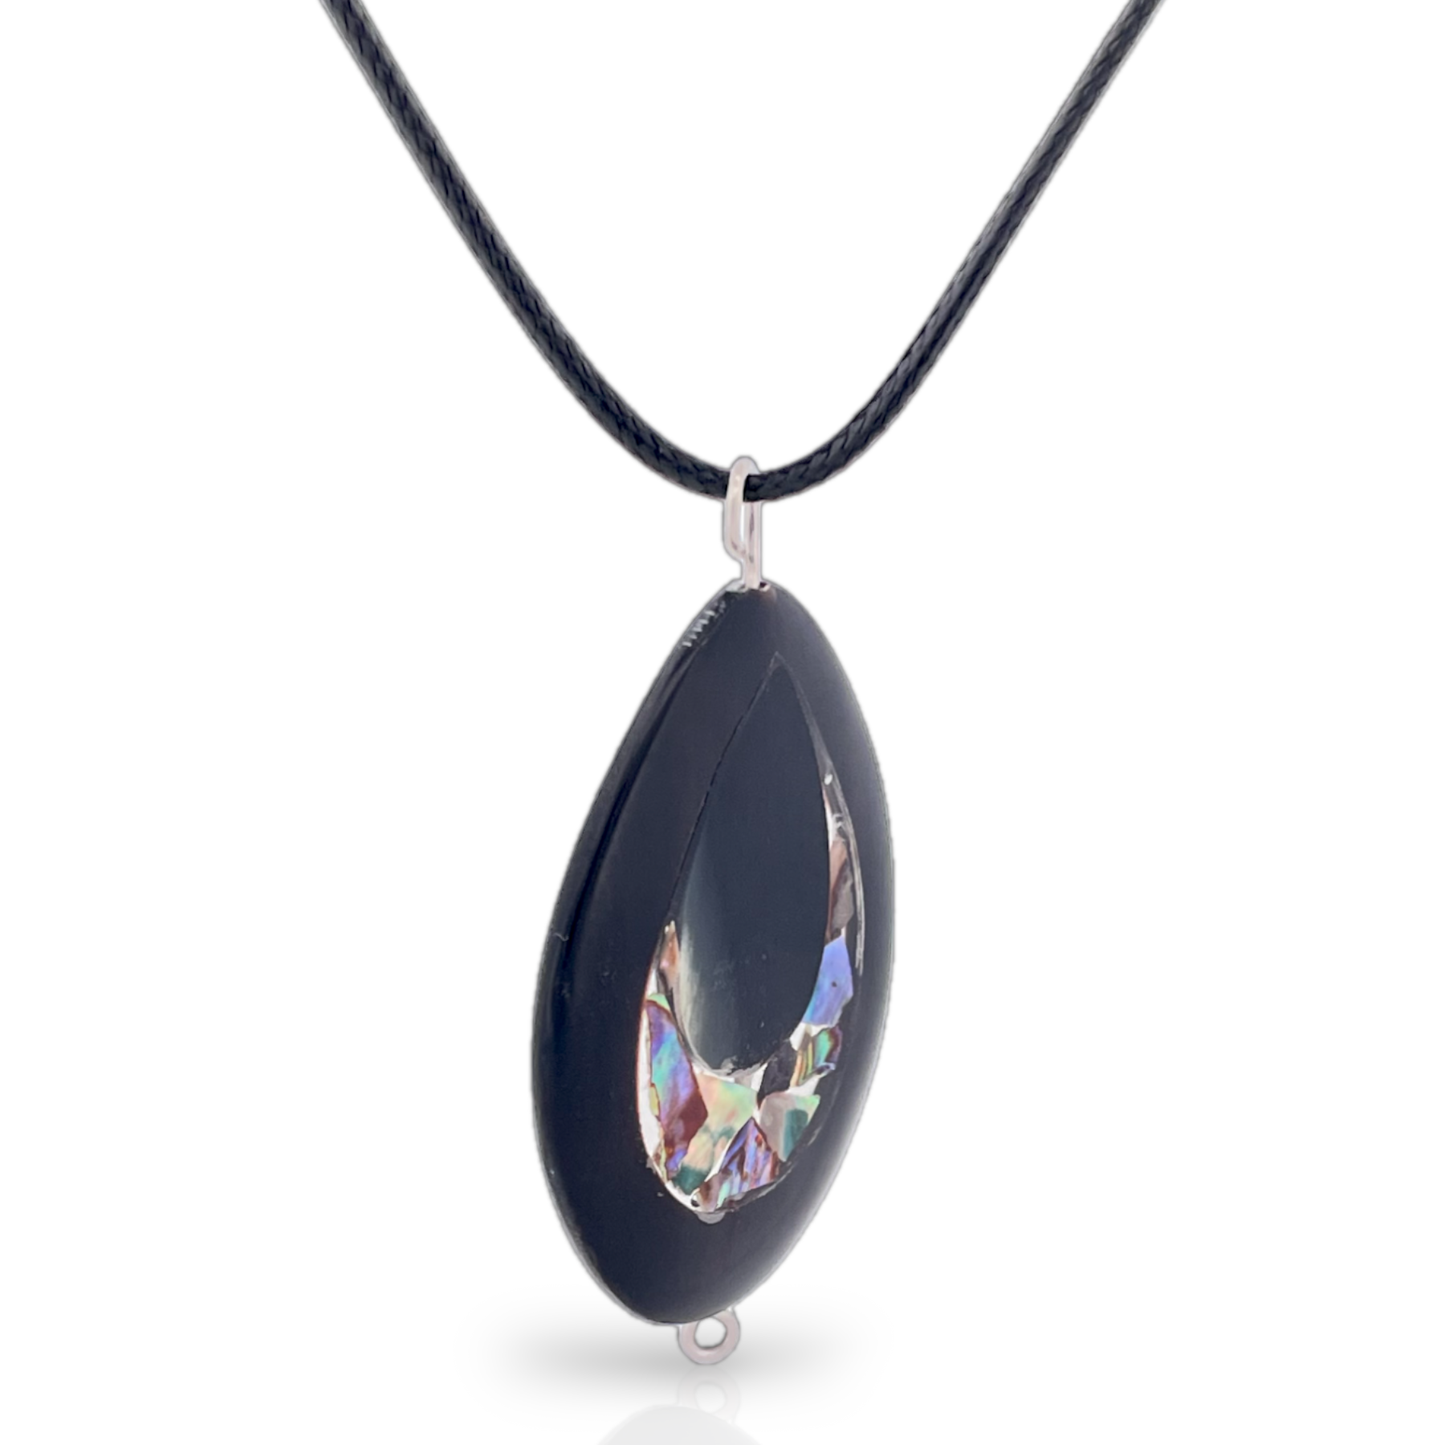 Jet Wood and Abalone in resin Teardrop Pendant Necklace